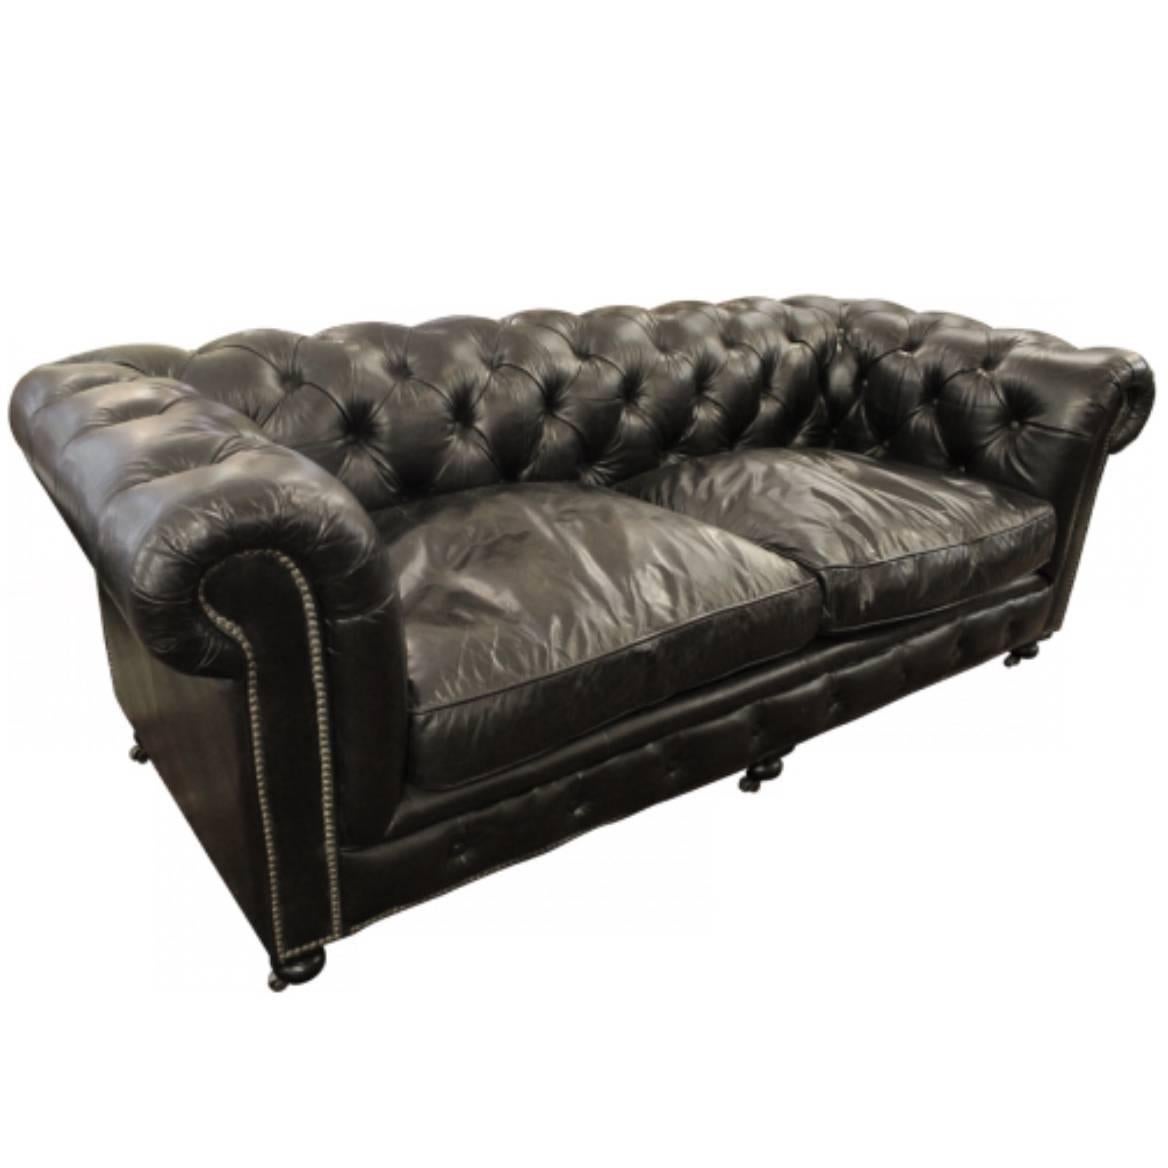 Large Ralph Lauren Black Leather Tufted Cigar Couch